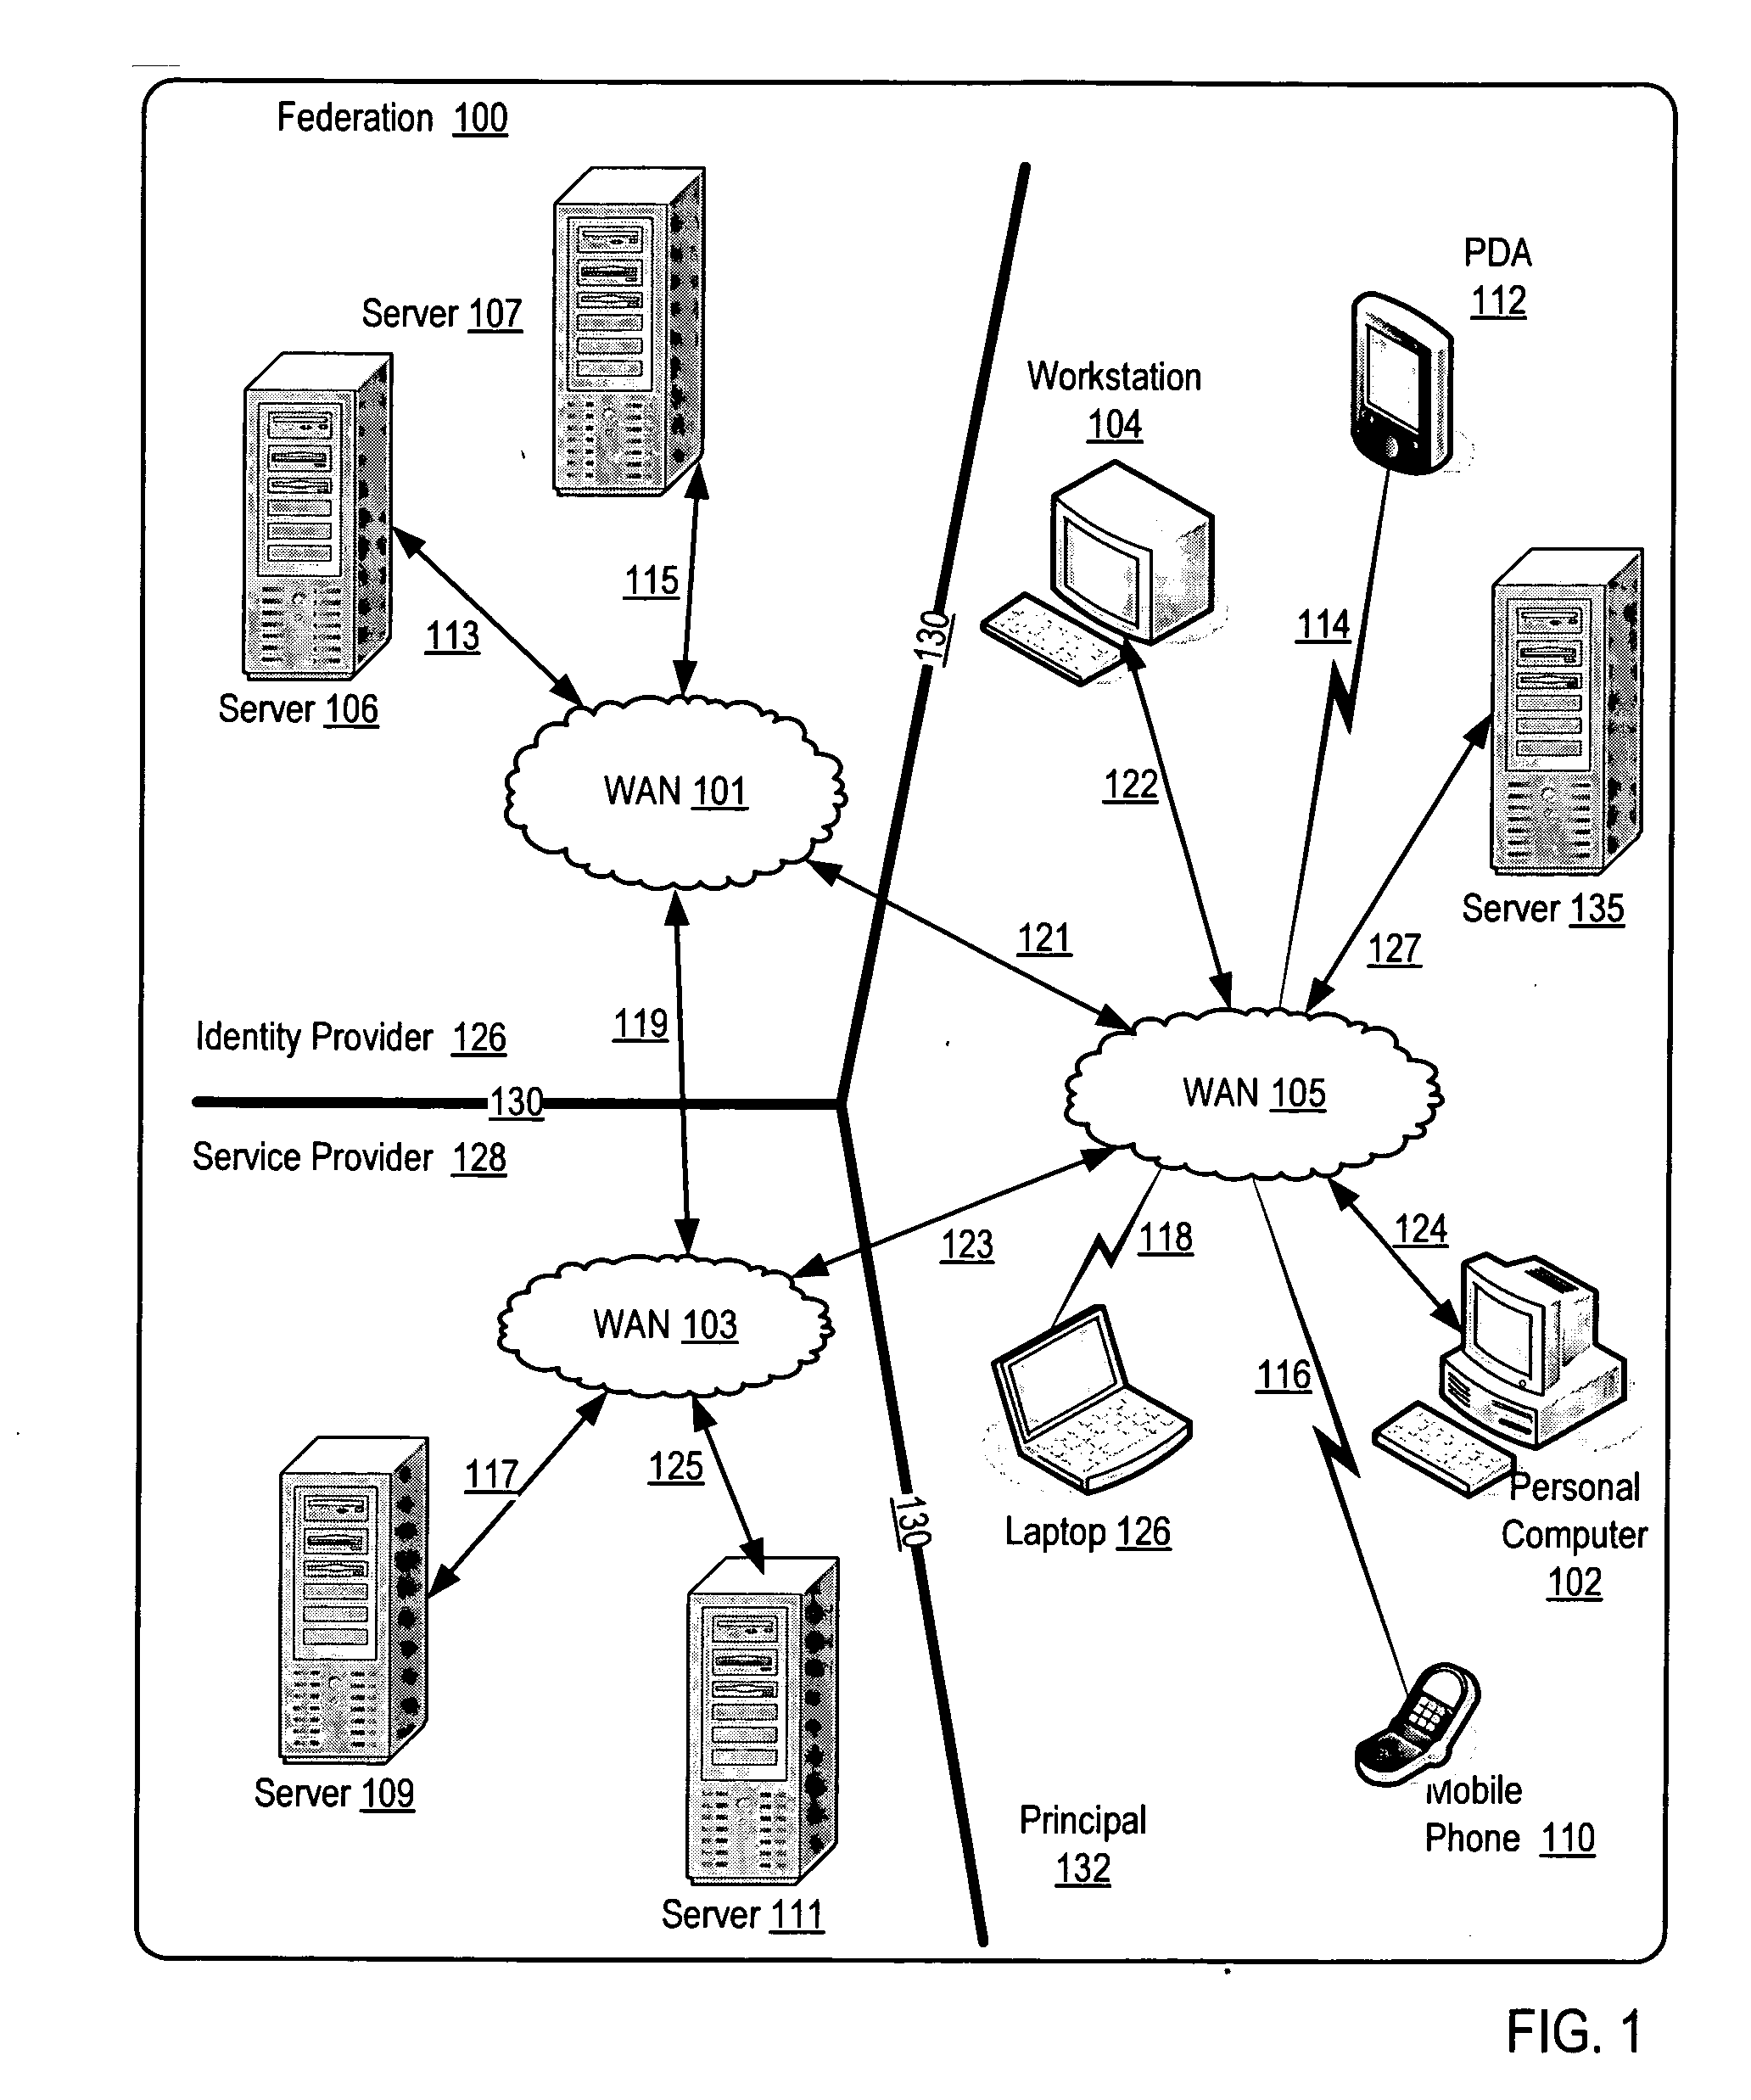 Authentication of a principal in a federation